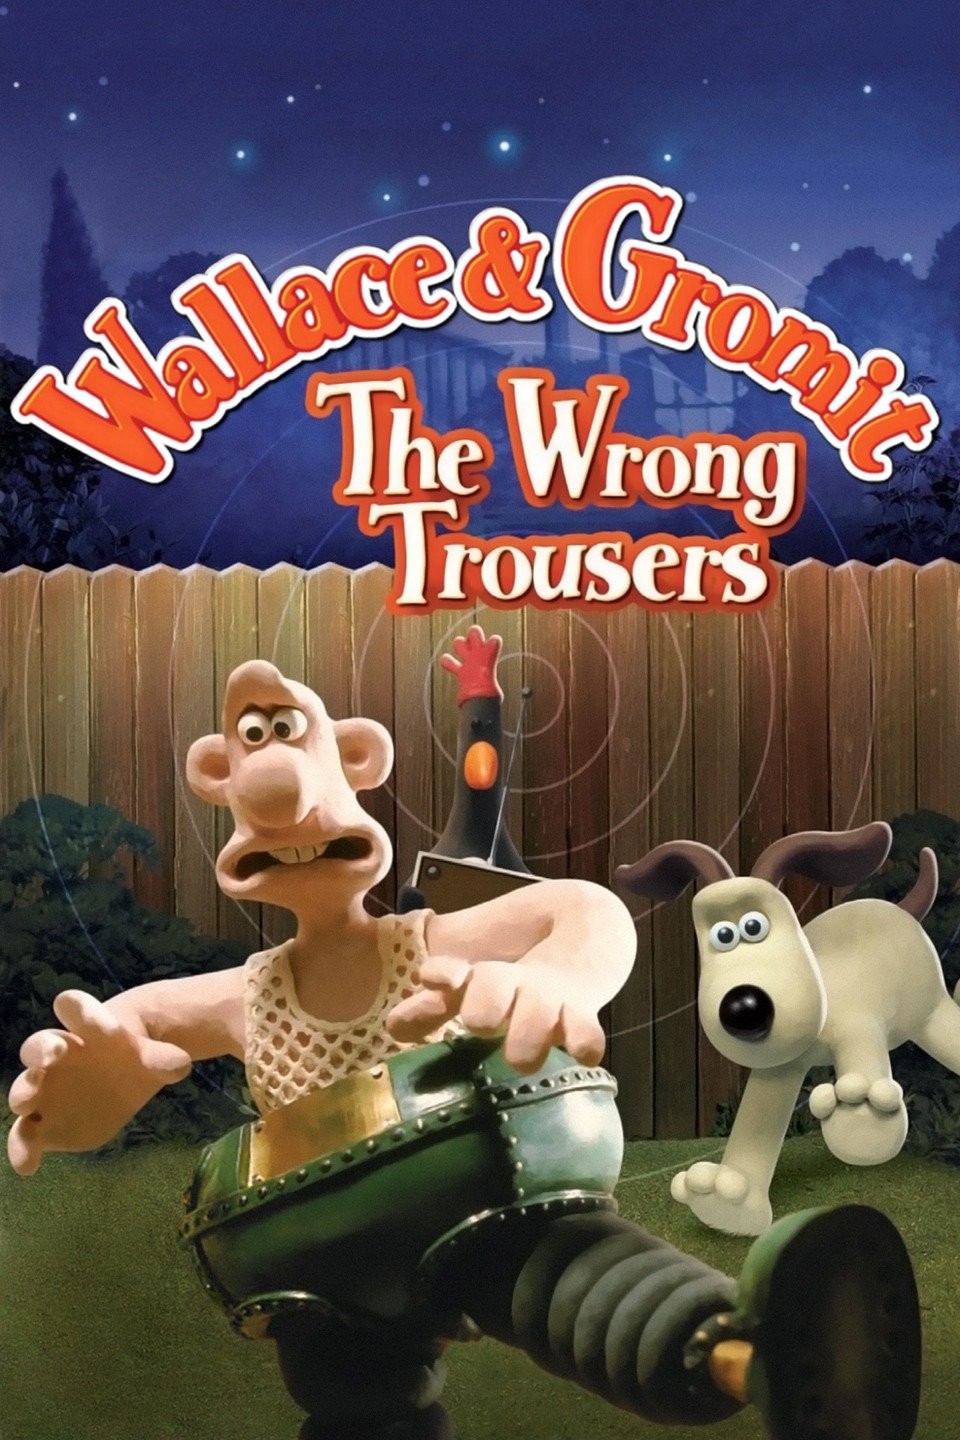 It's the wrong trousers Gromit! And they've gone wrong! : r/wallaceandgromit